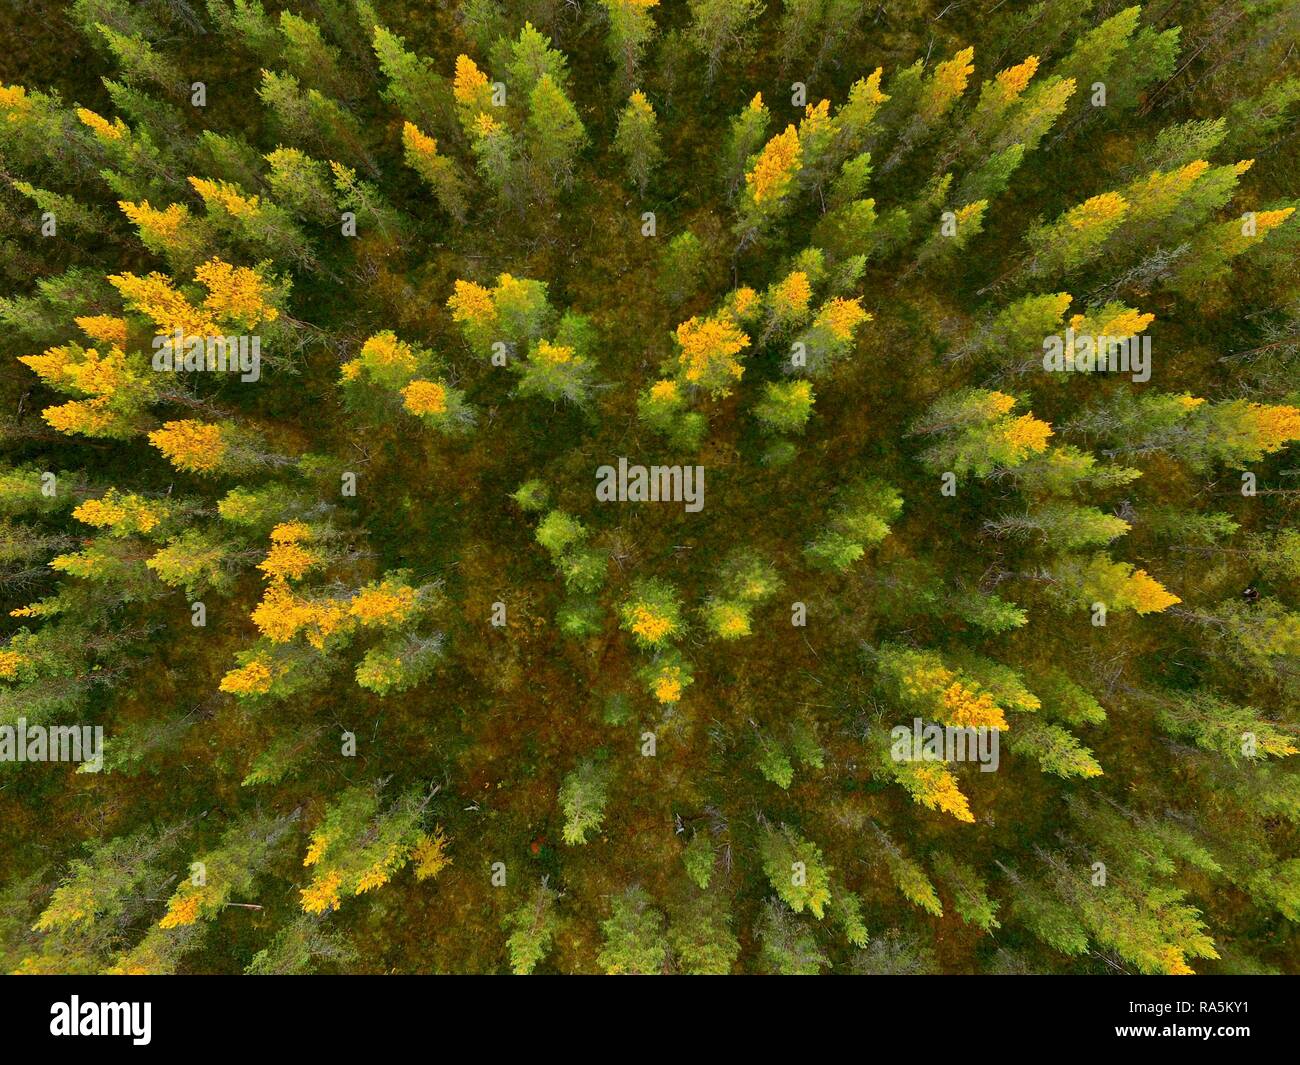 Drone shot, Larches (Larix) with autumnal yellow coloration in wetland, Sodankylä, Lappi, Finland Stock Photo